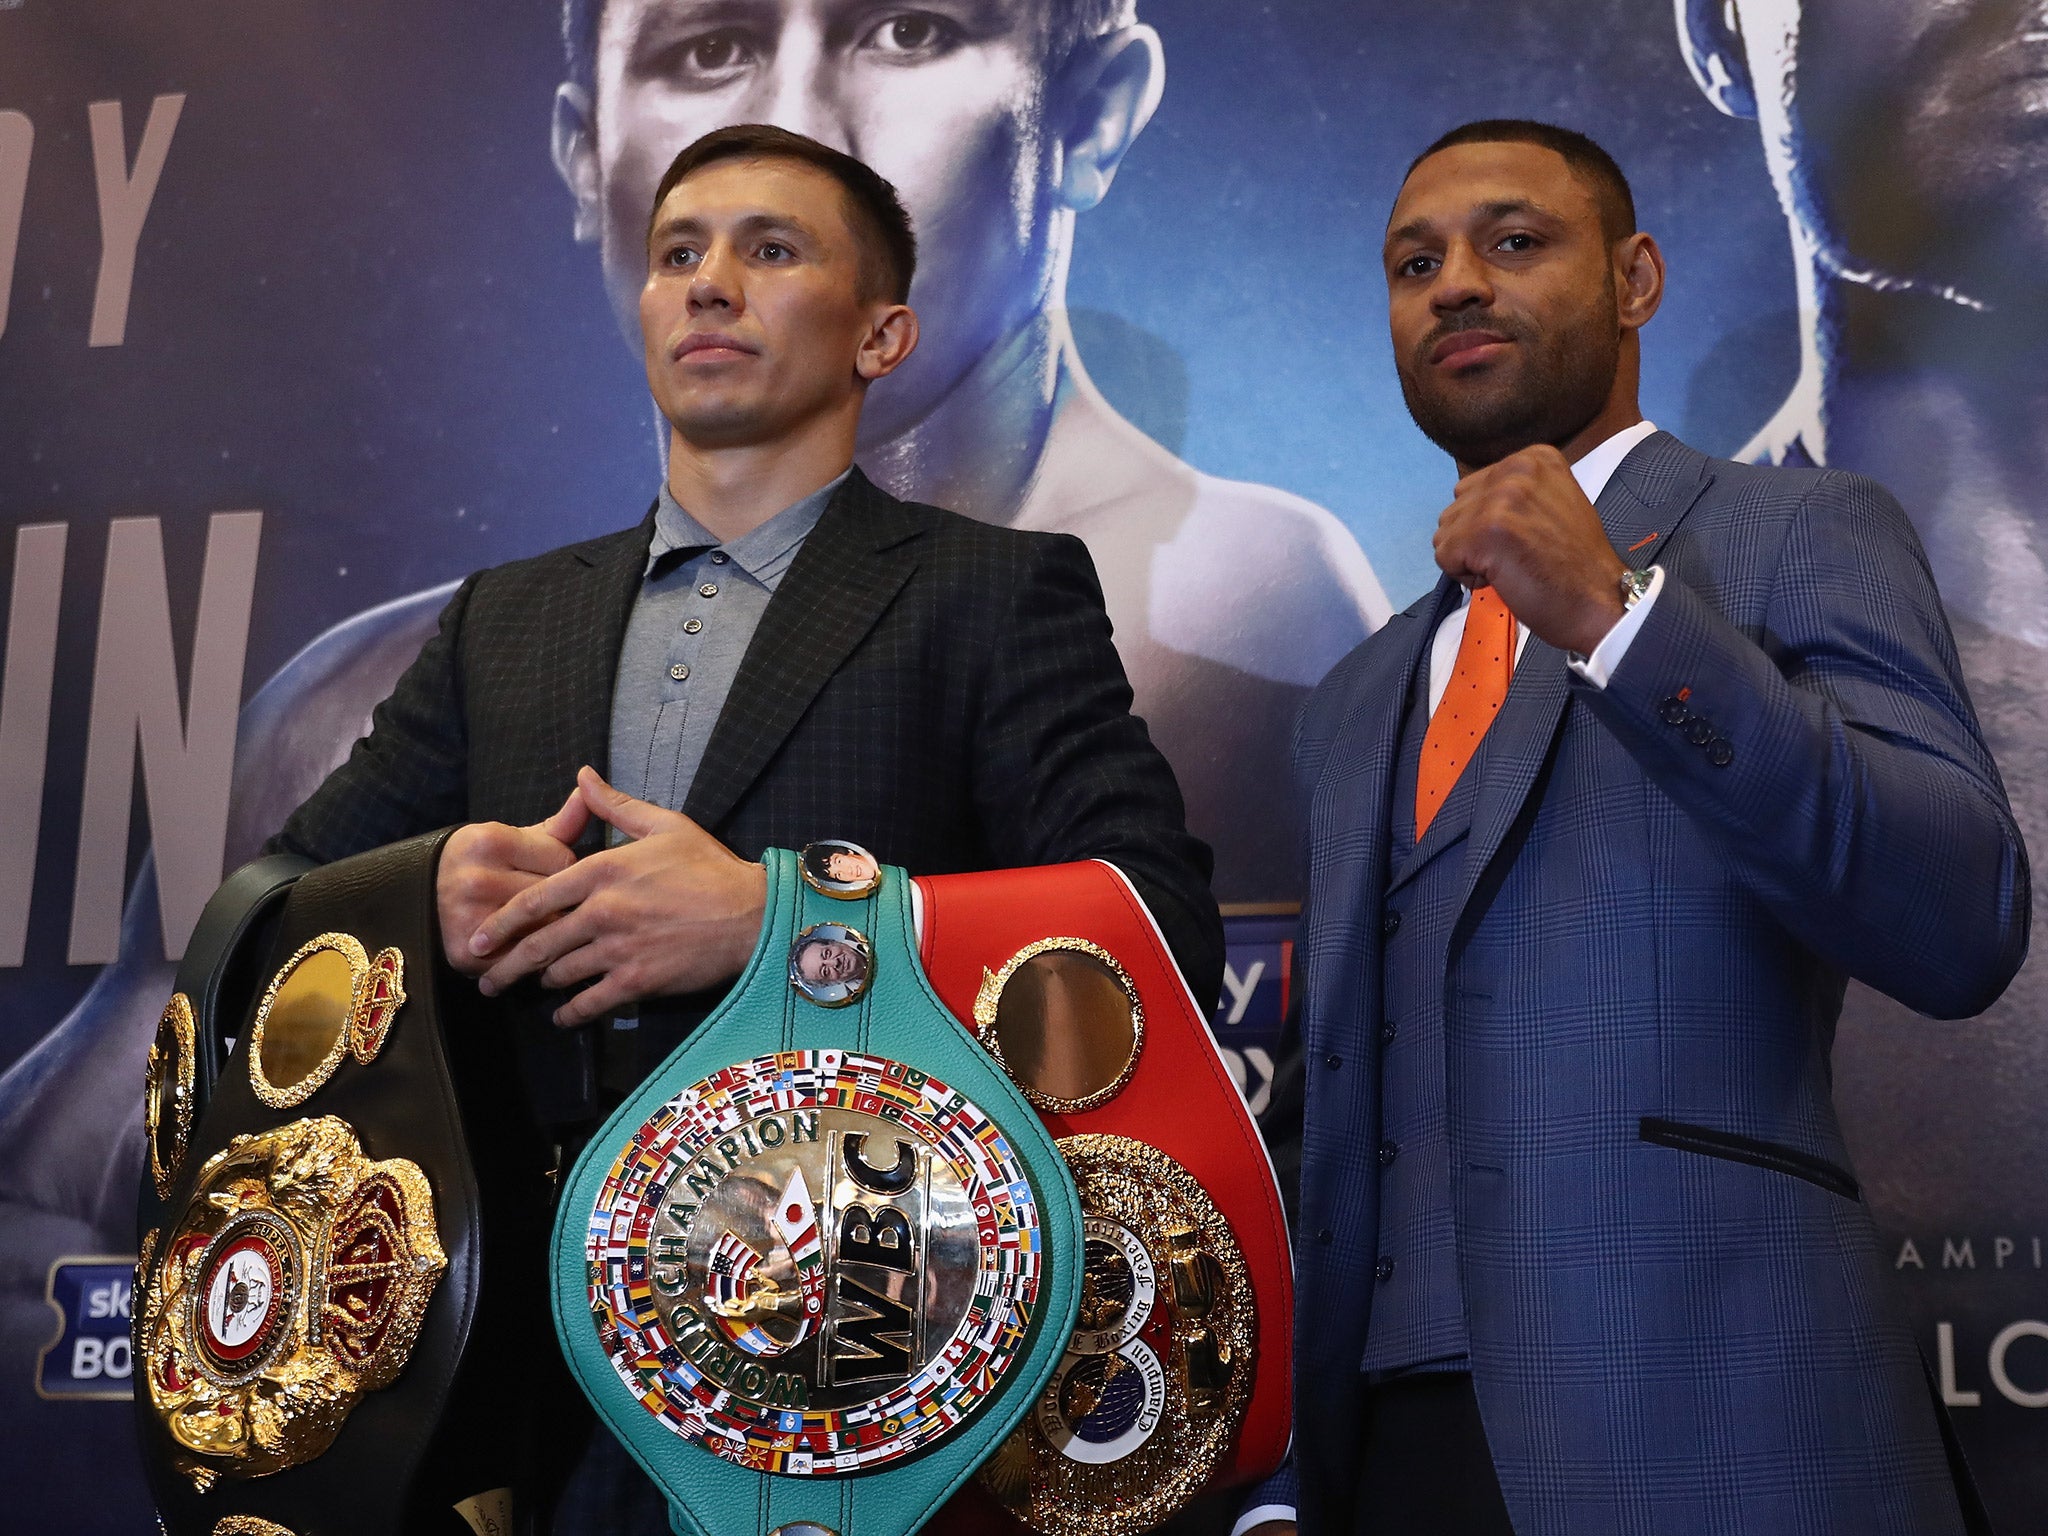 Kell Brook faces Gennady Golovkin this weekend at London's O2 Arena